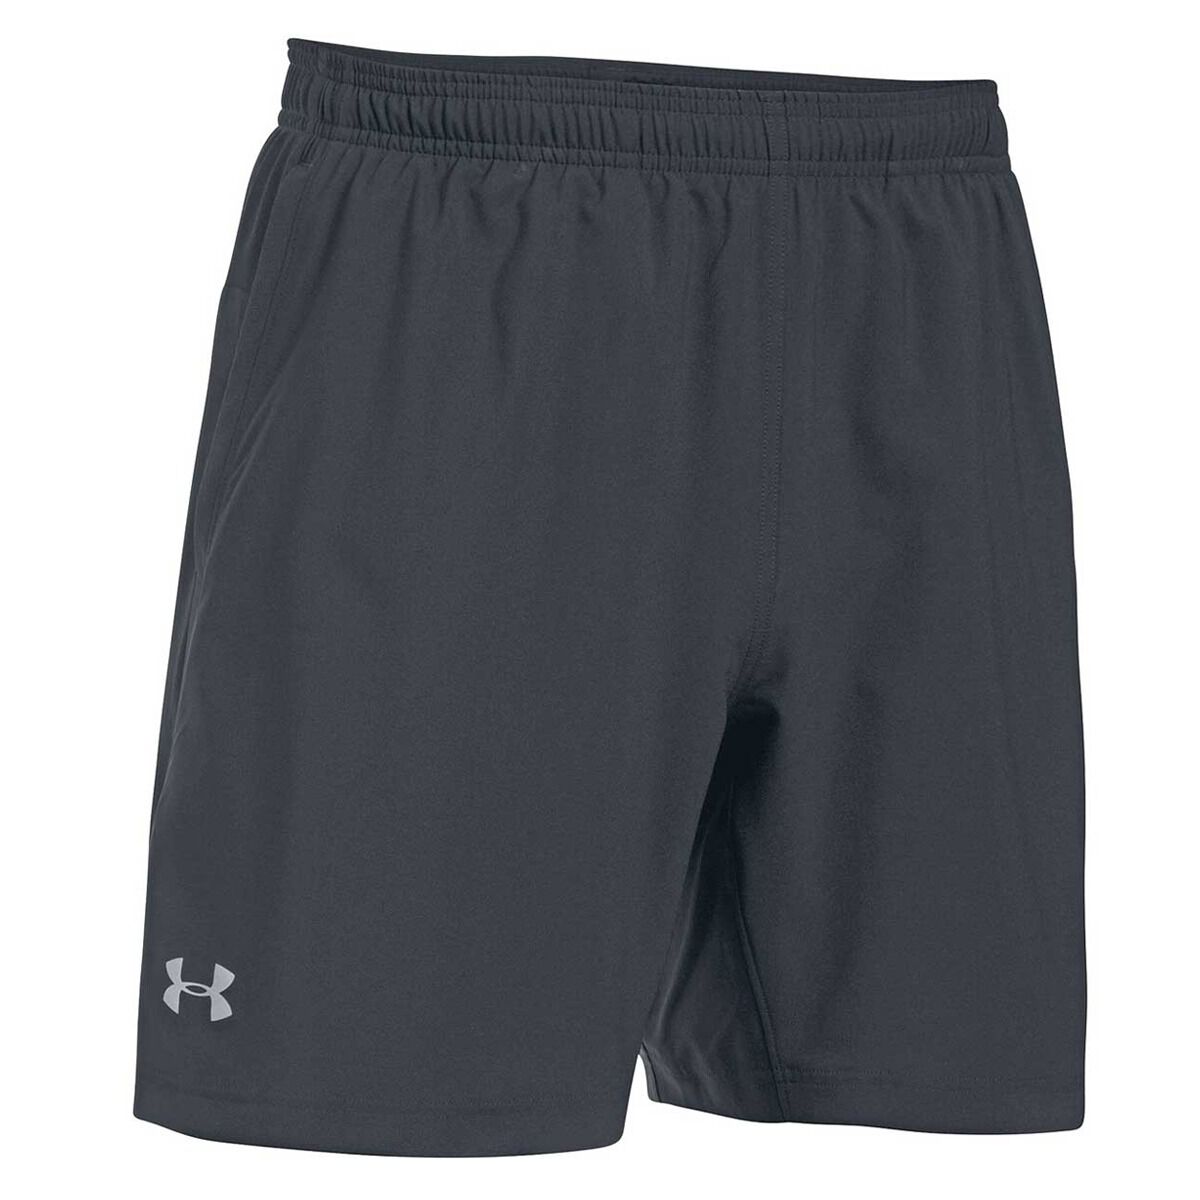 Under Armour Mens Woven Launch 2 in 1 